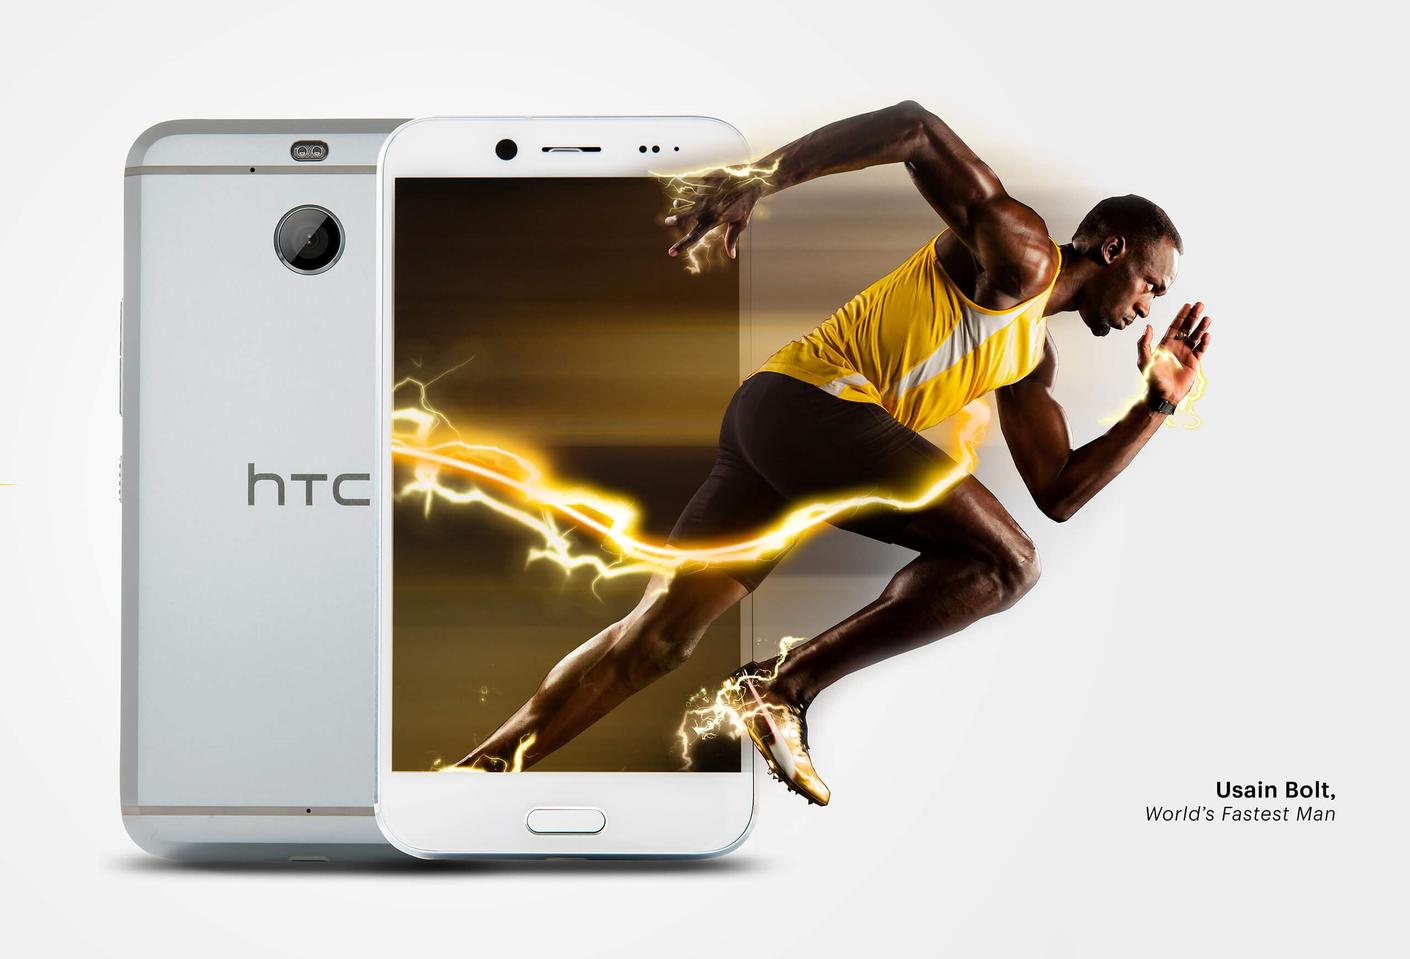 HTC Bolt launched in USA